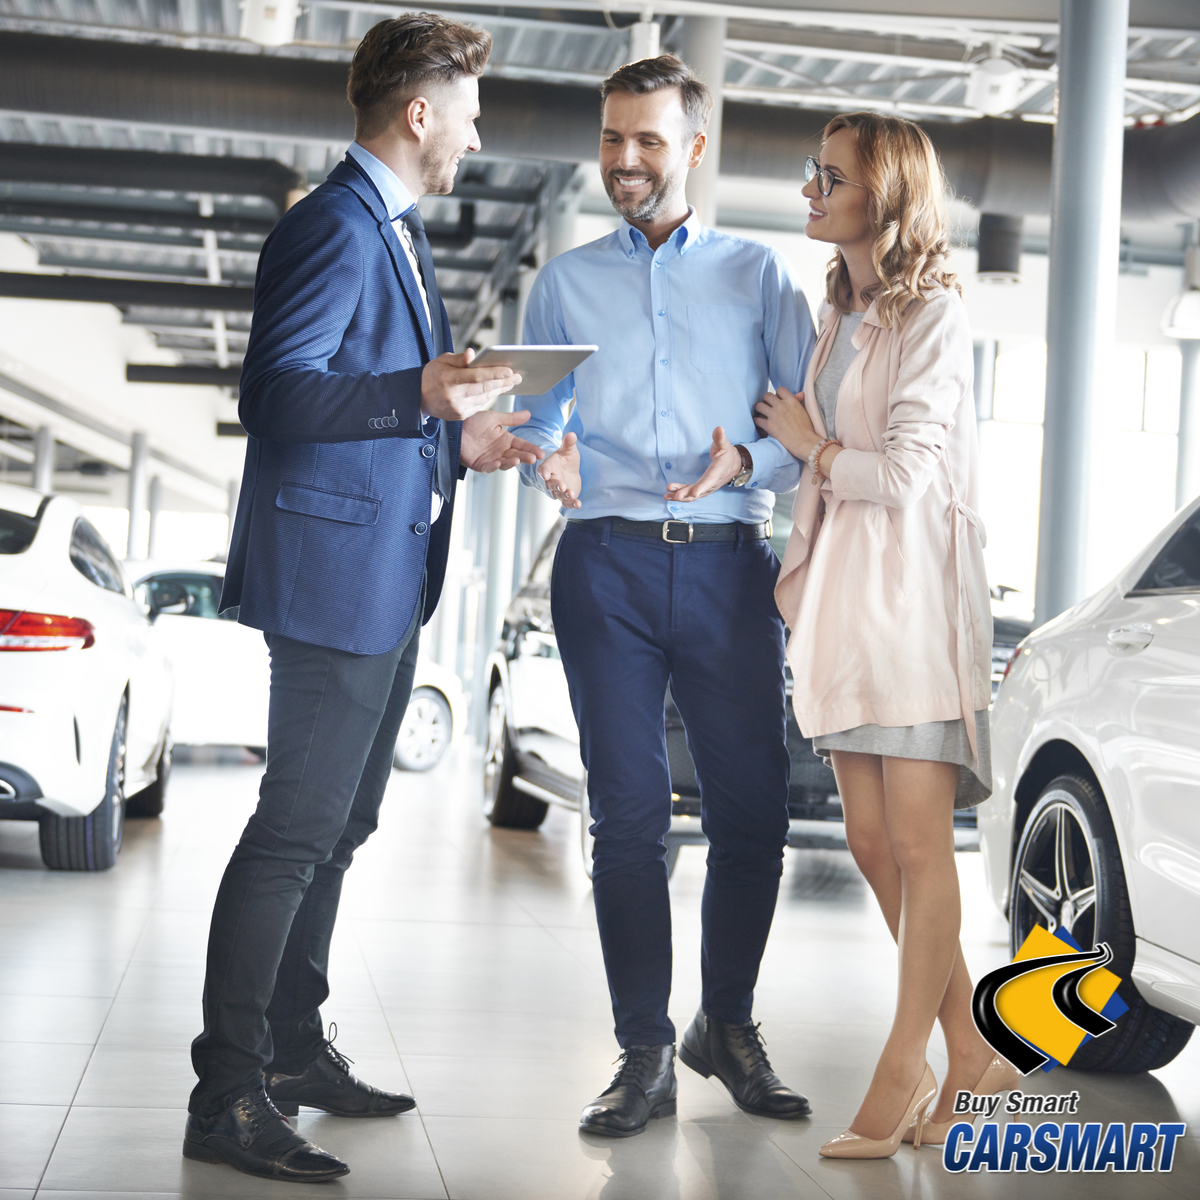 Good Auto Financing Make It Easier to Buy a Reliable Car for Your Everyday Commute